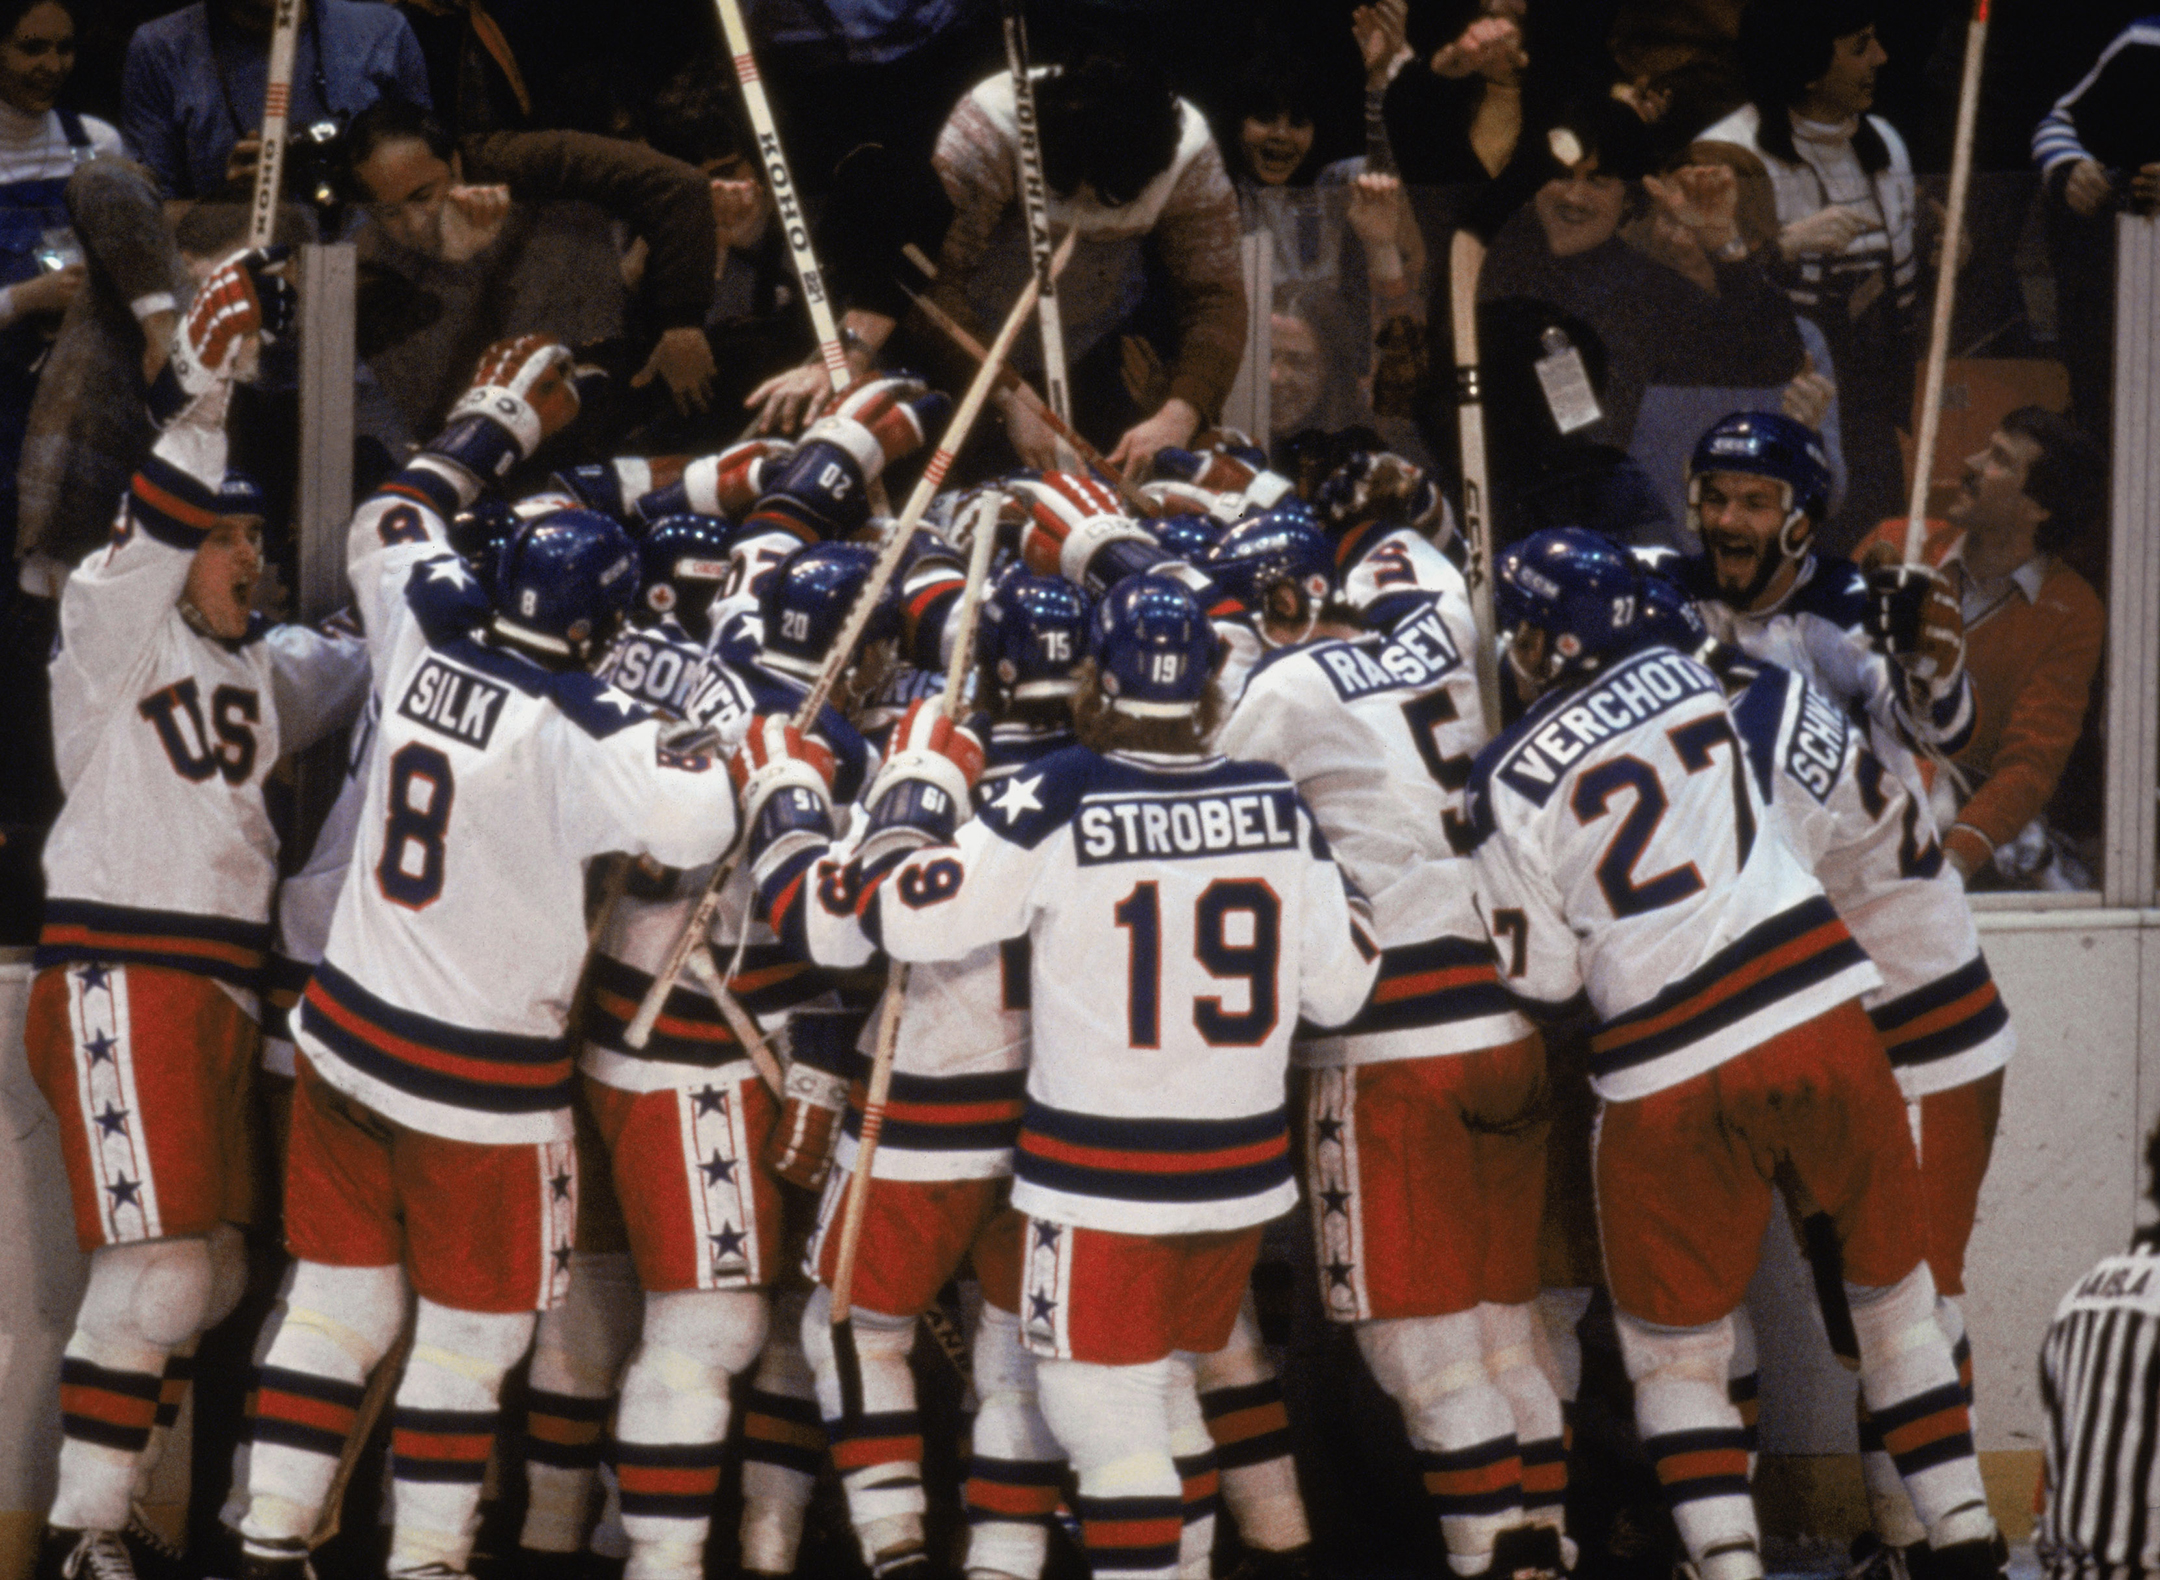 US ice hockey team celebrating defeating the USSR in the 1980 winter Olympics